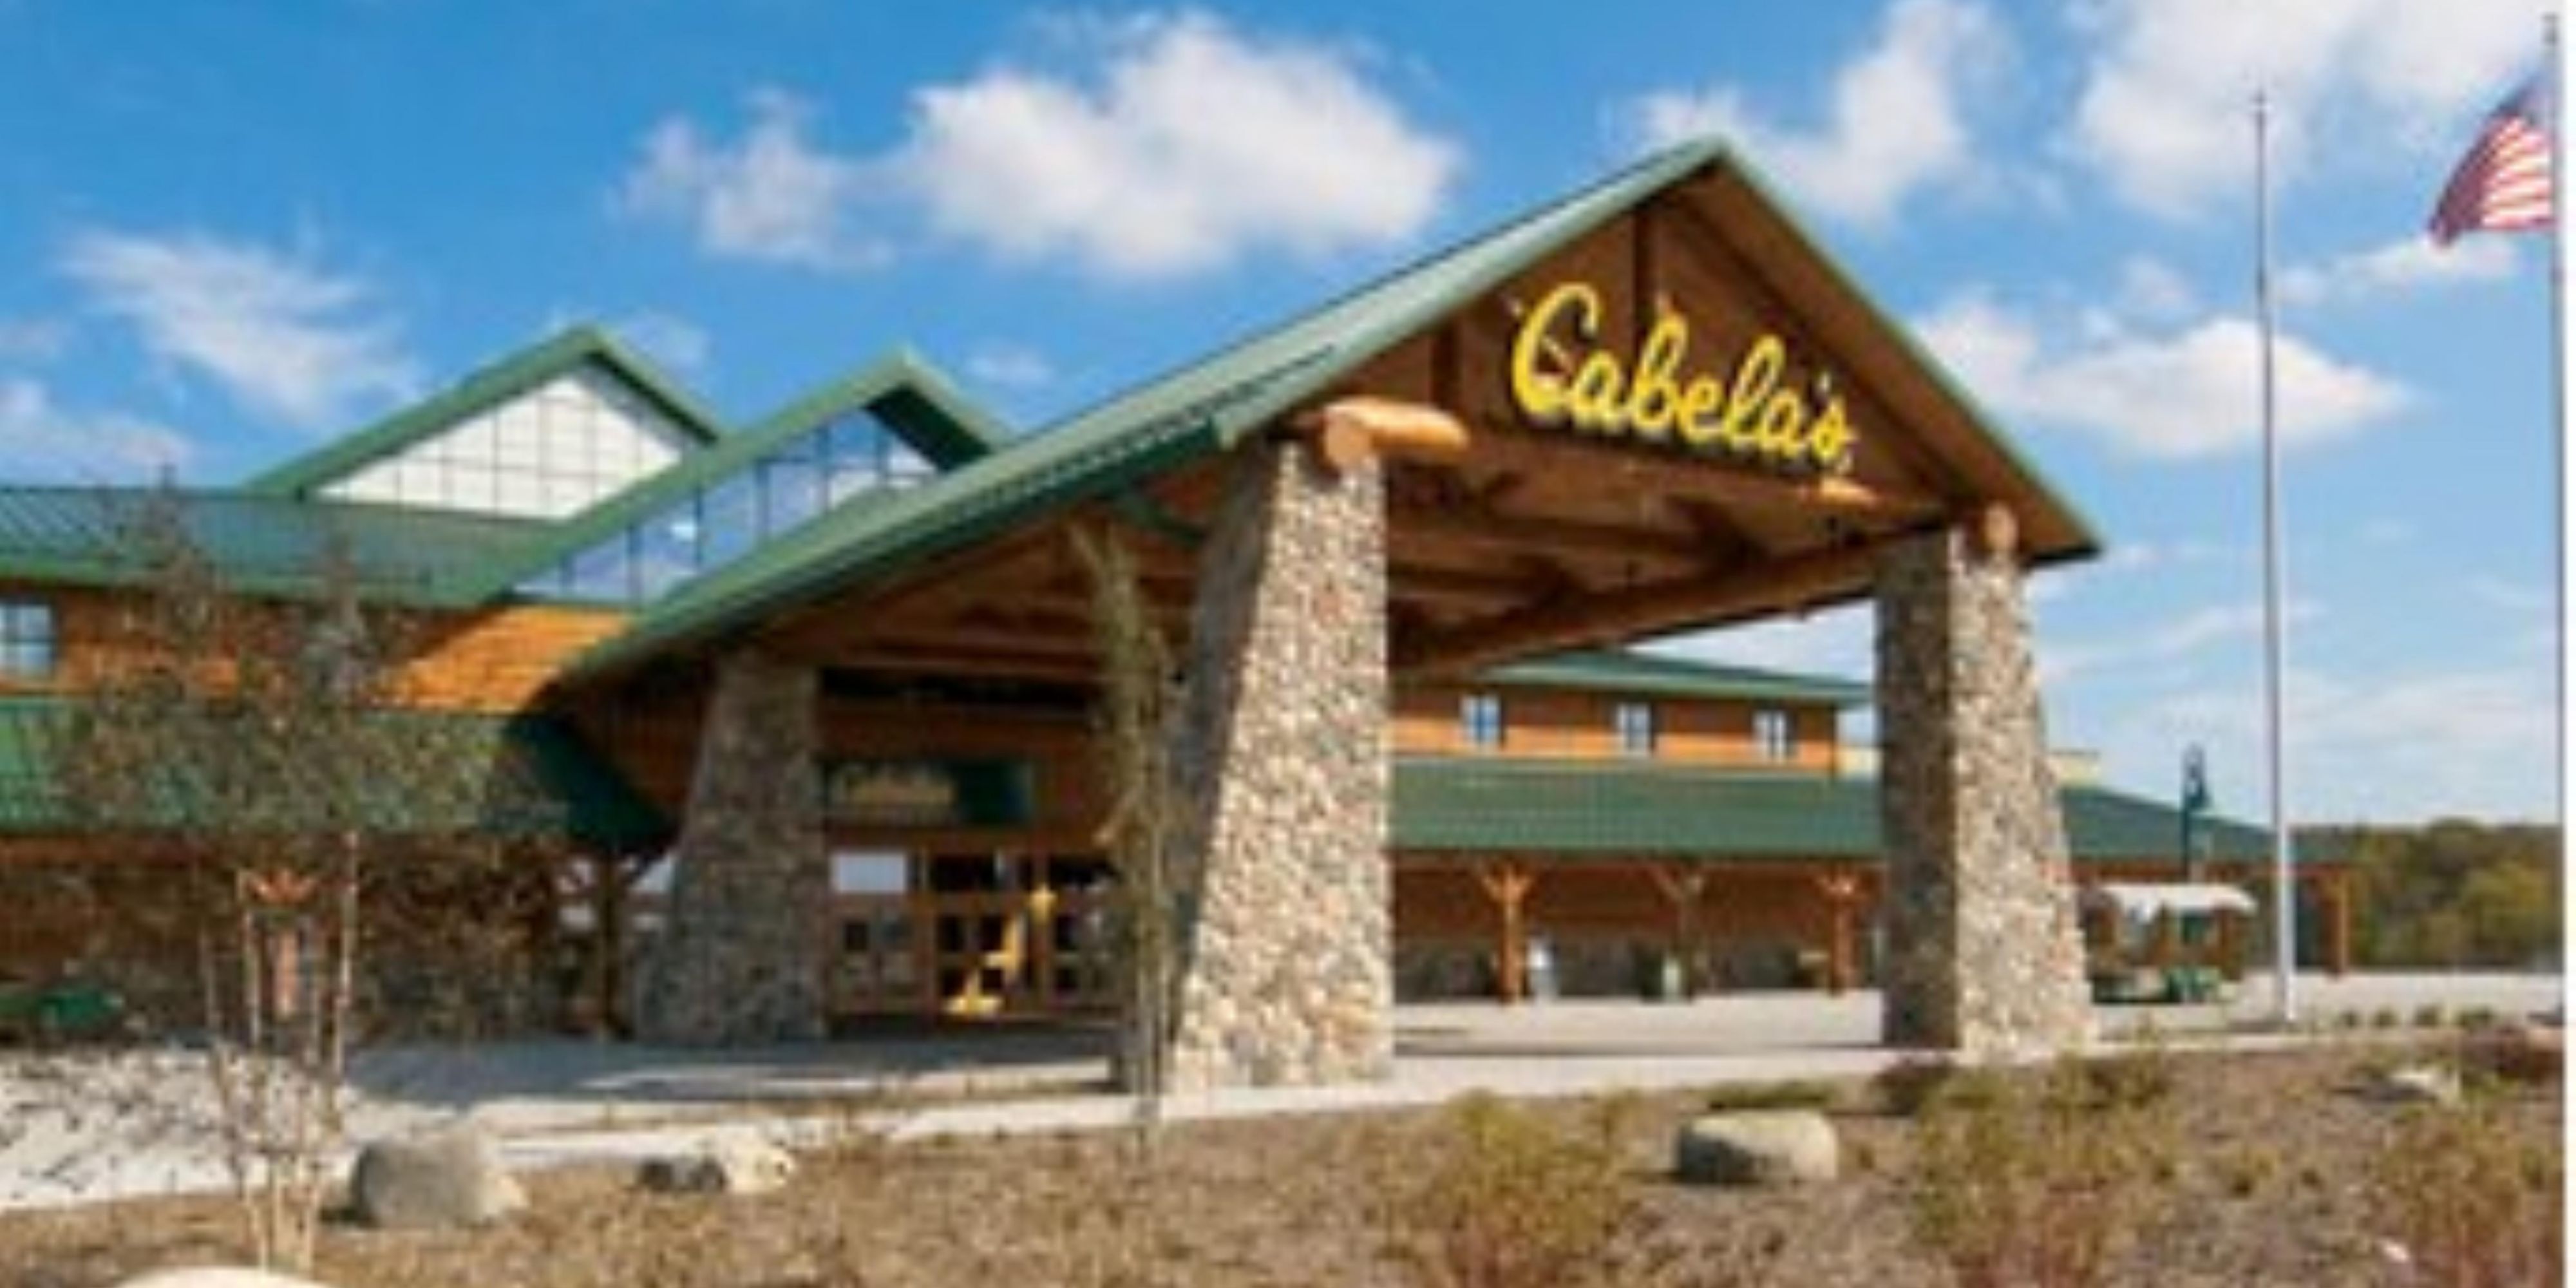 The Holiday Inn Express and Suites Rogers is conveniently located near Cabela's. Enjoy a day of shopping and the Cabela's Experience with our special Cabela's package. 